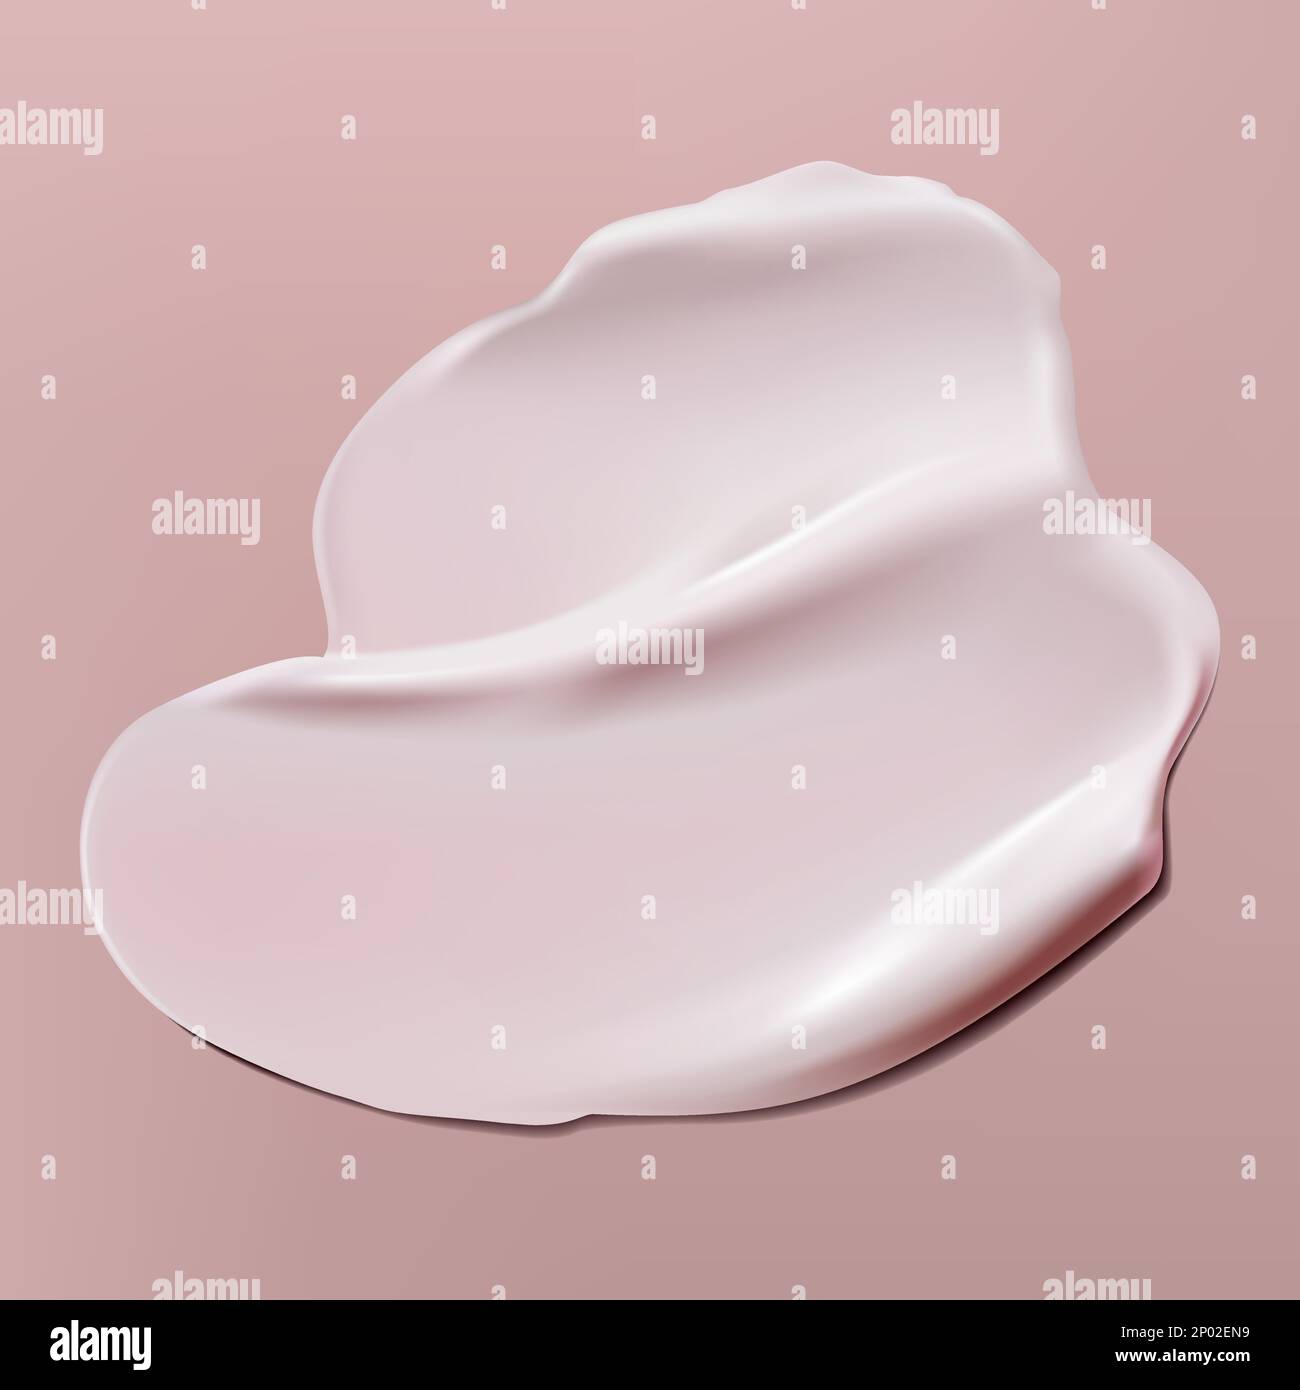 Vector Skincare or Cosmetics Cream Paste 3D illustration for Lotion, Shampoo, Shower Gel or Moisturizer Products. Stock Vector